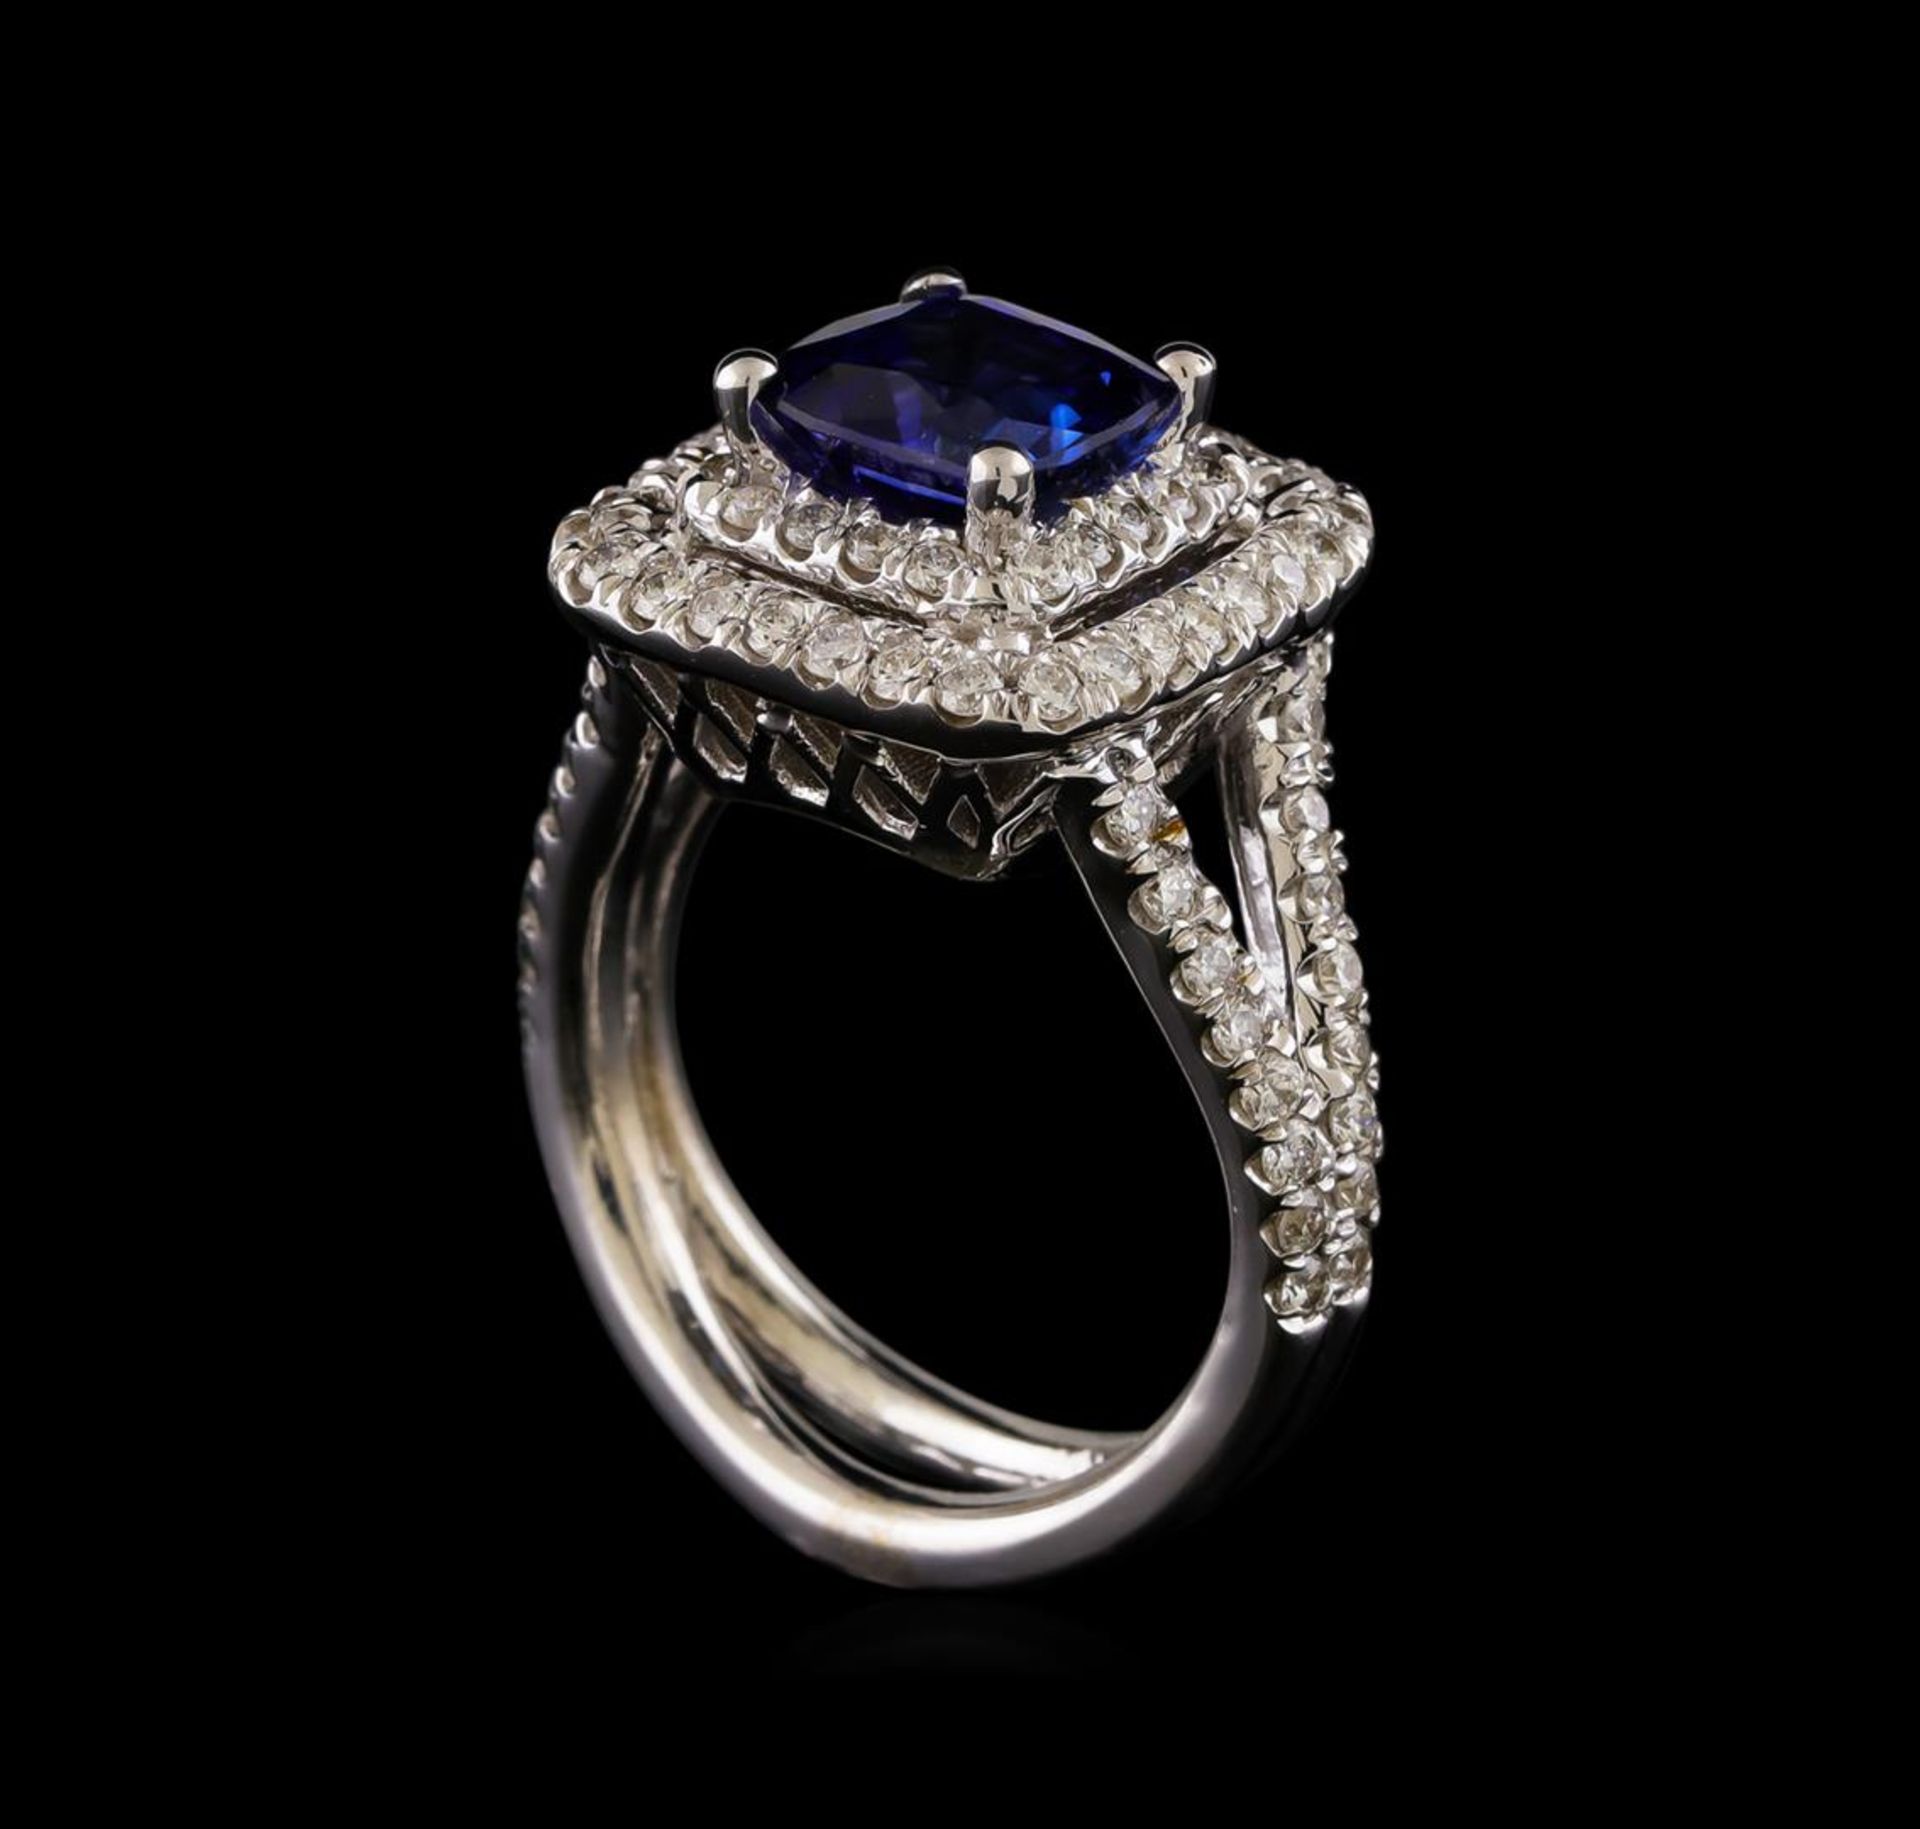 14KT White Gold 2.72 ctw Sapphire and Diamond Ring - Image 4 of 5